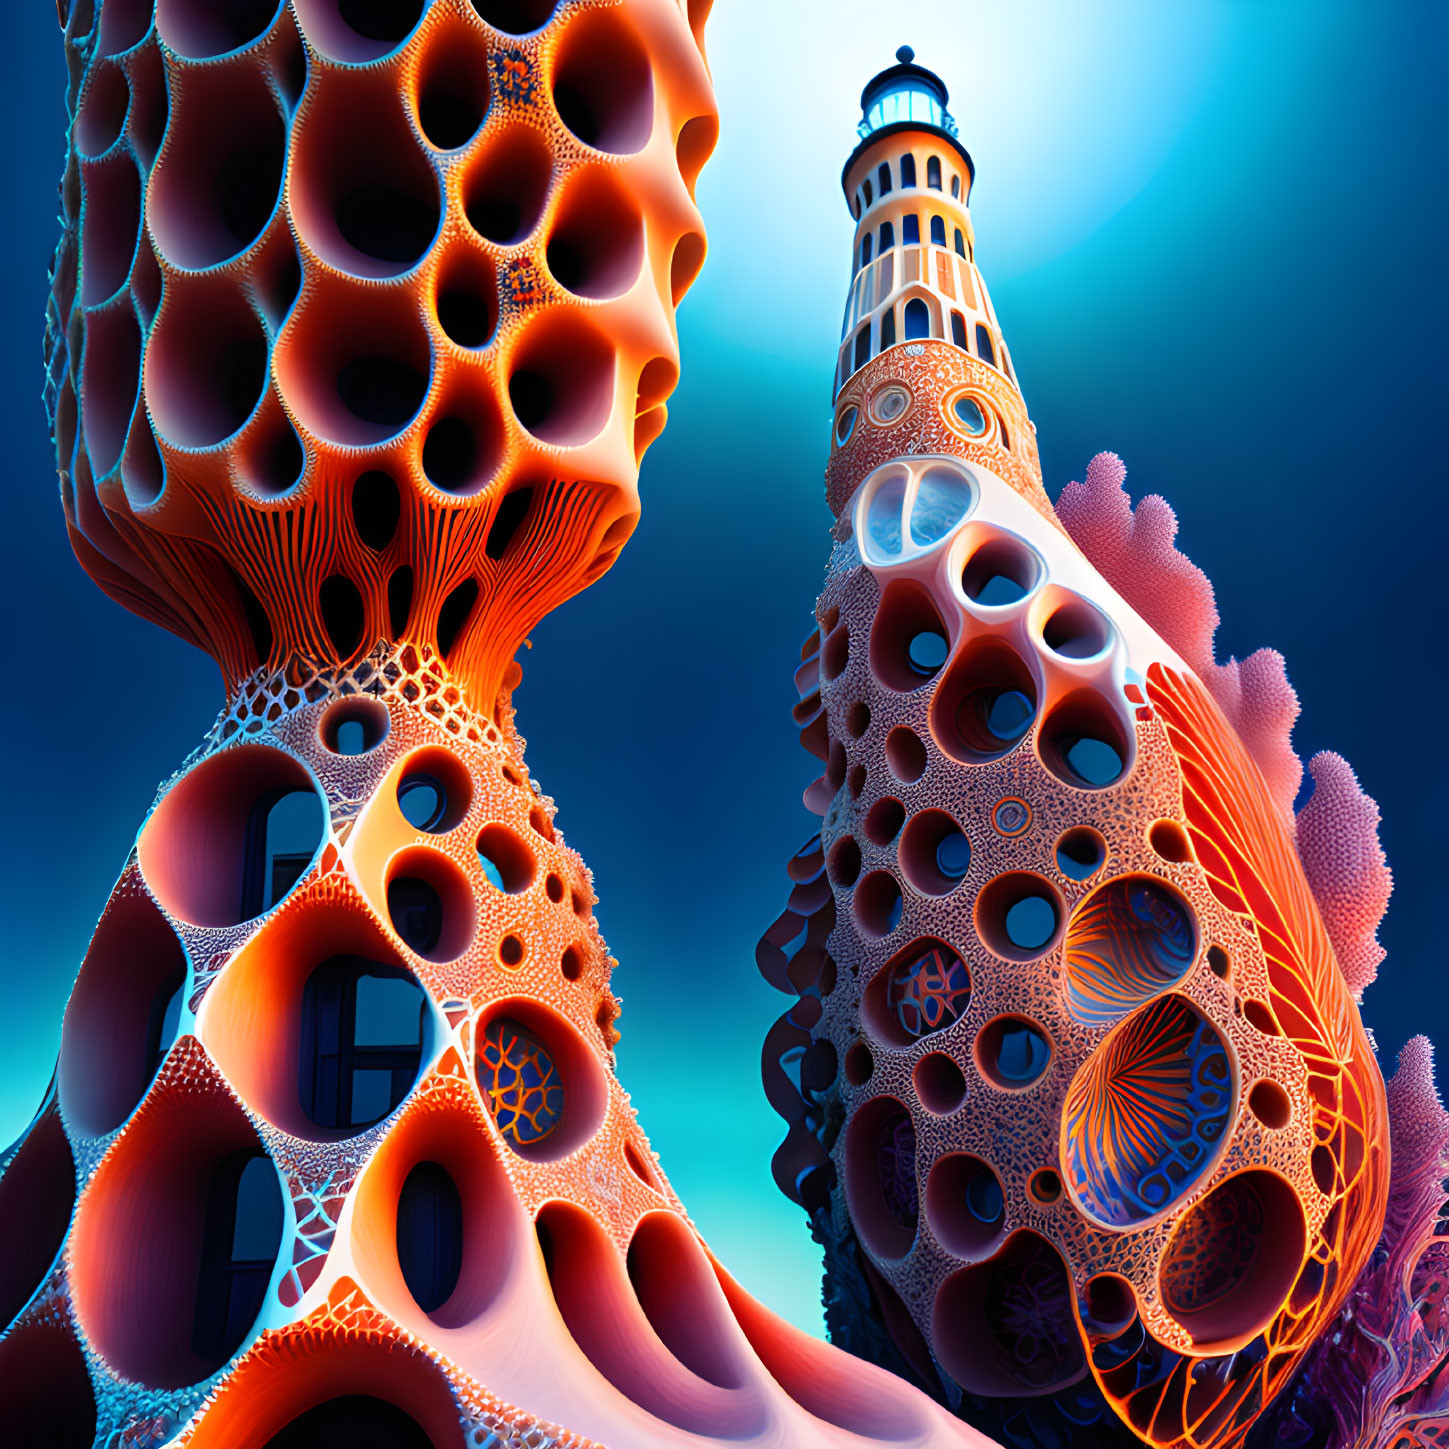 Surreal digital artwork of lighthouse and coral-like structures